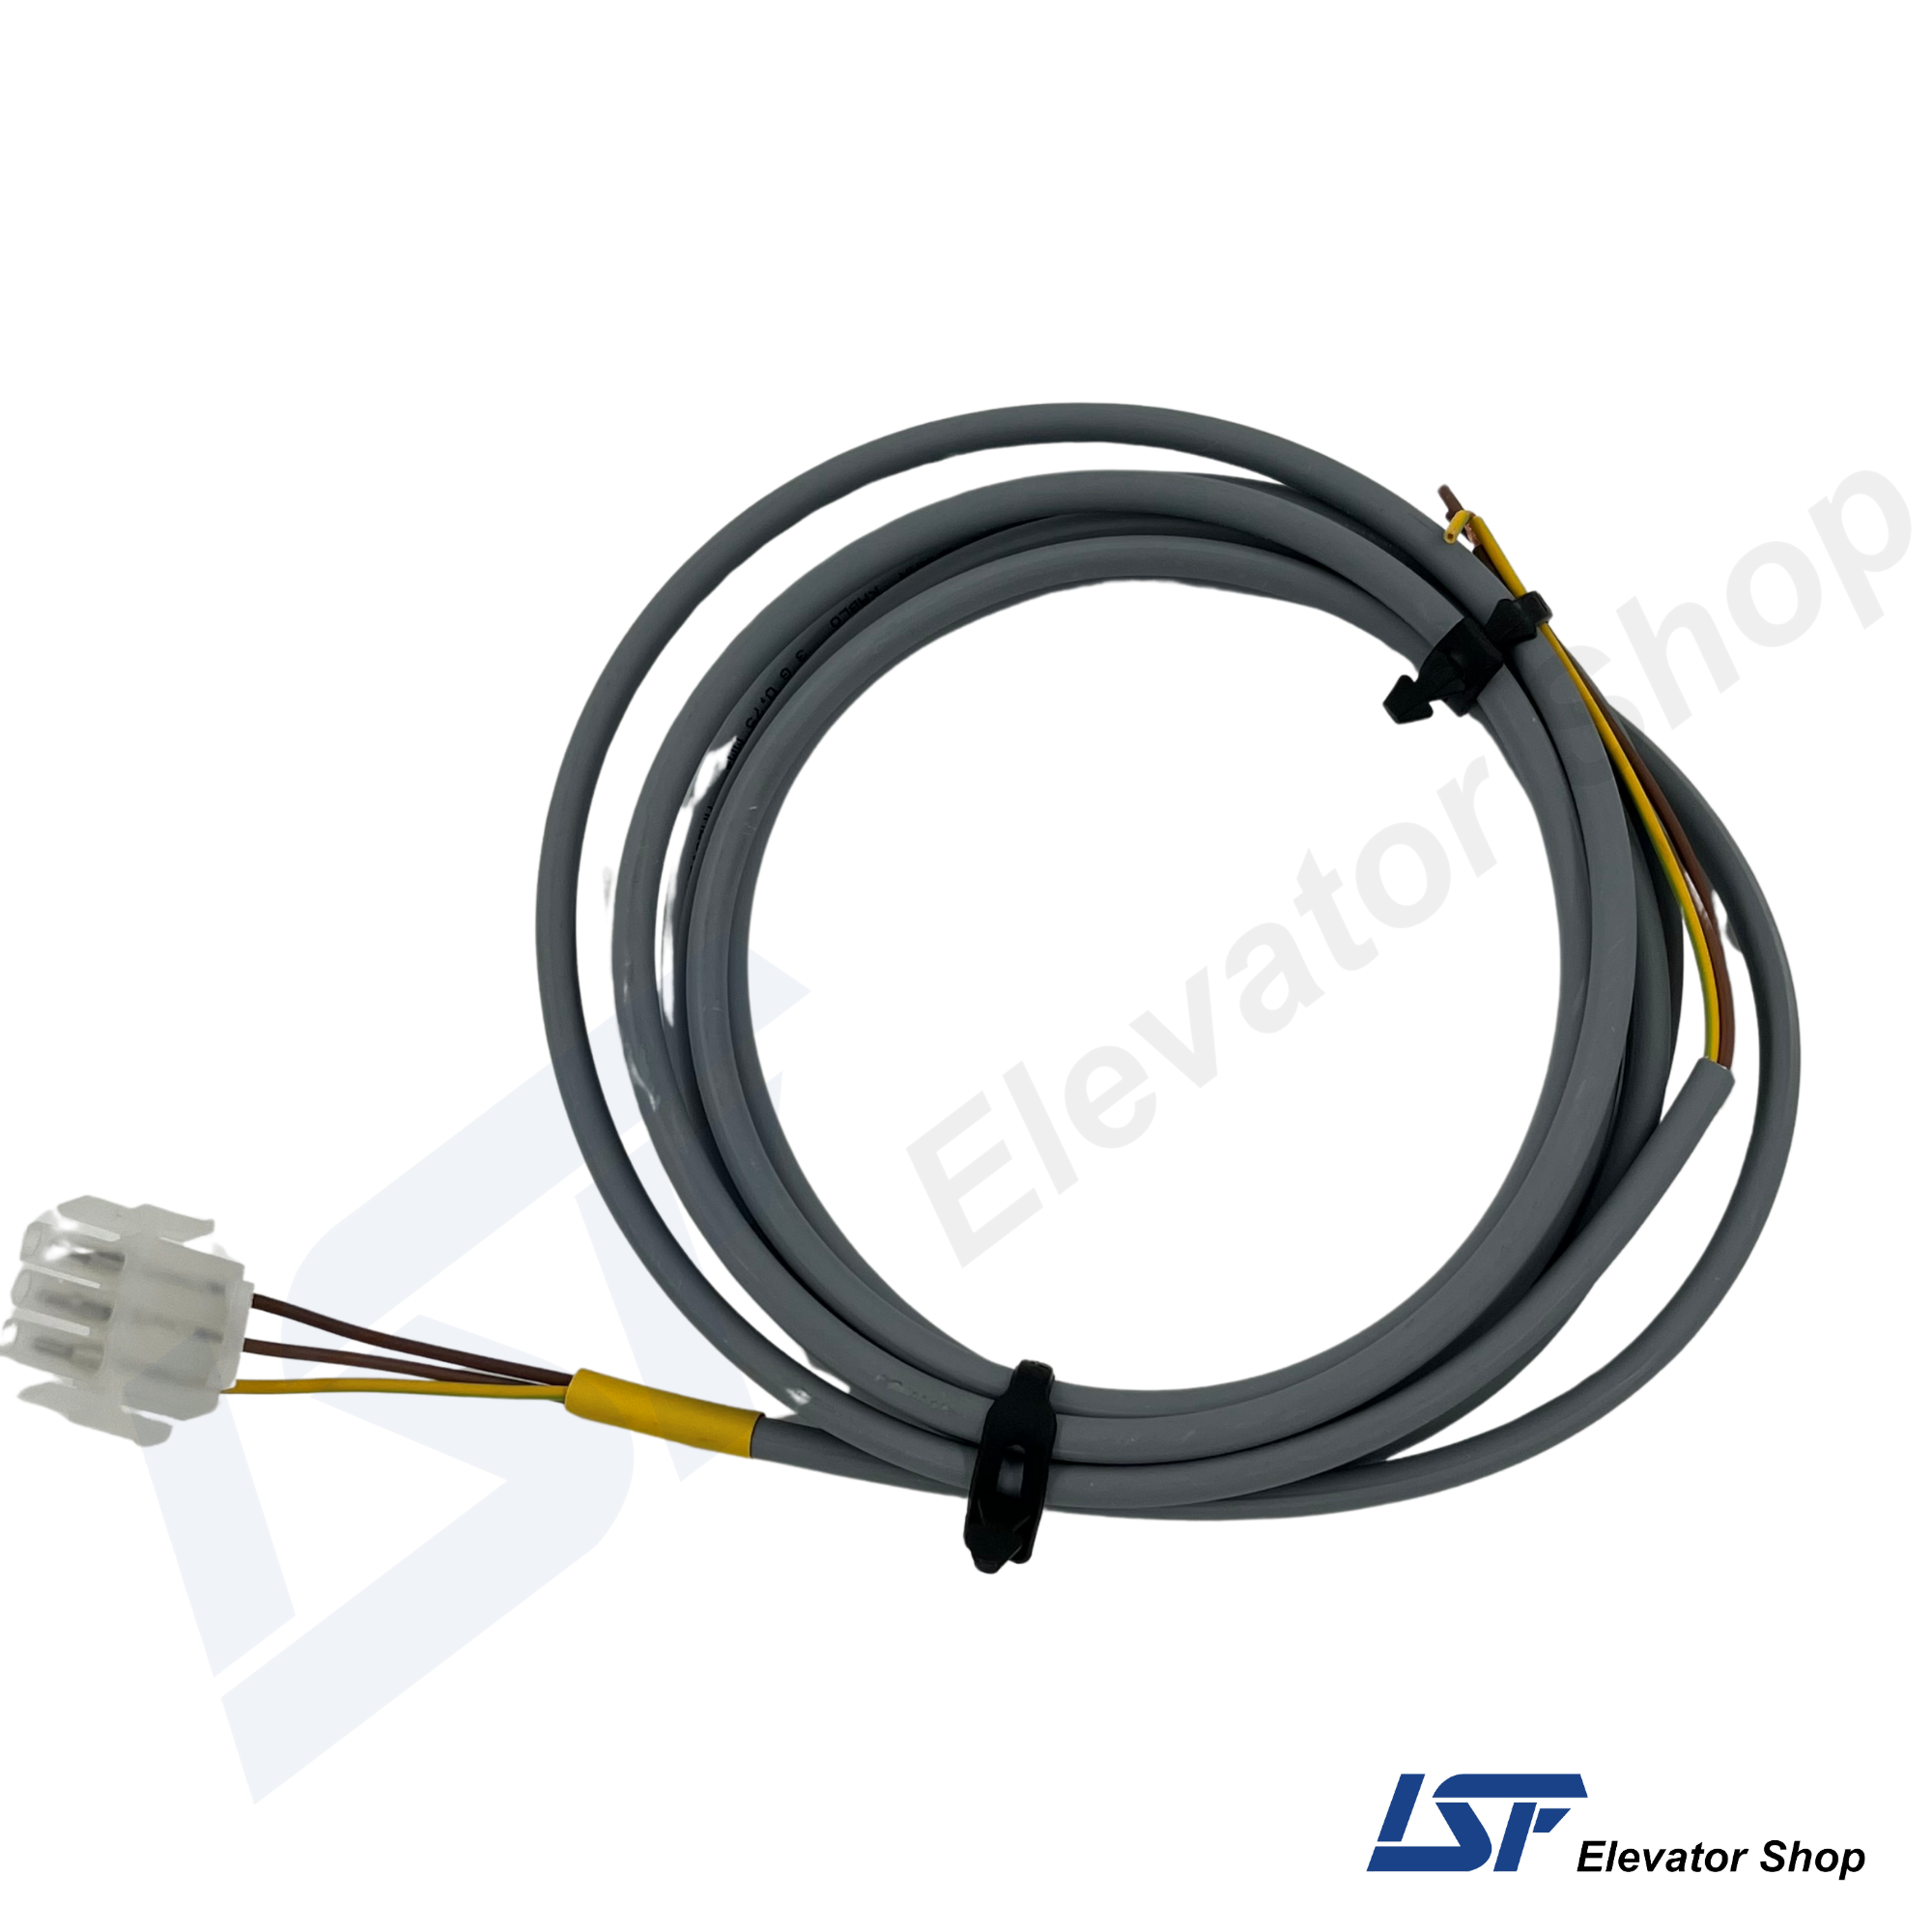 KBL-D1C-2 Arkel Door Contacts Cable 3m. for Elevator Systems